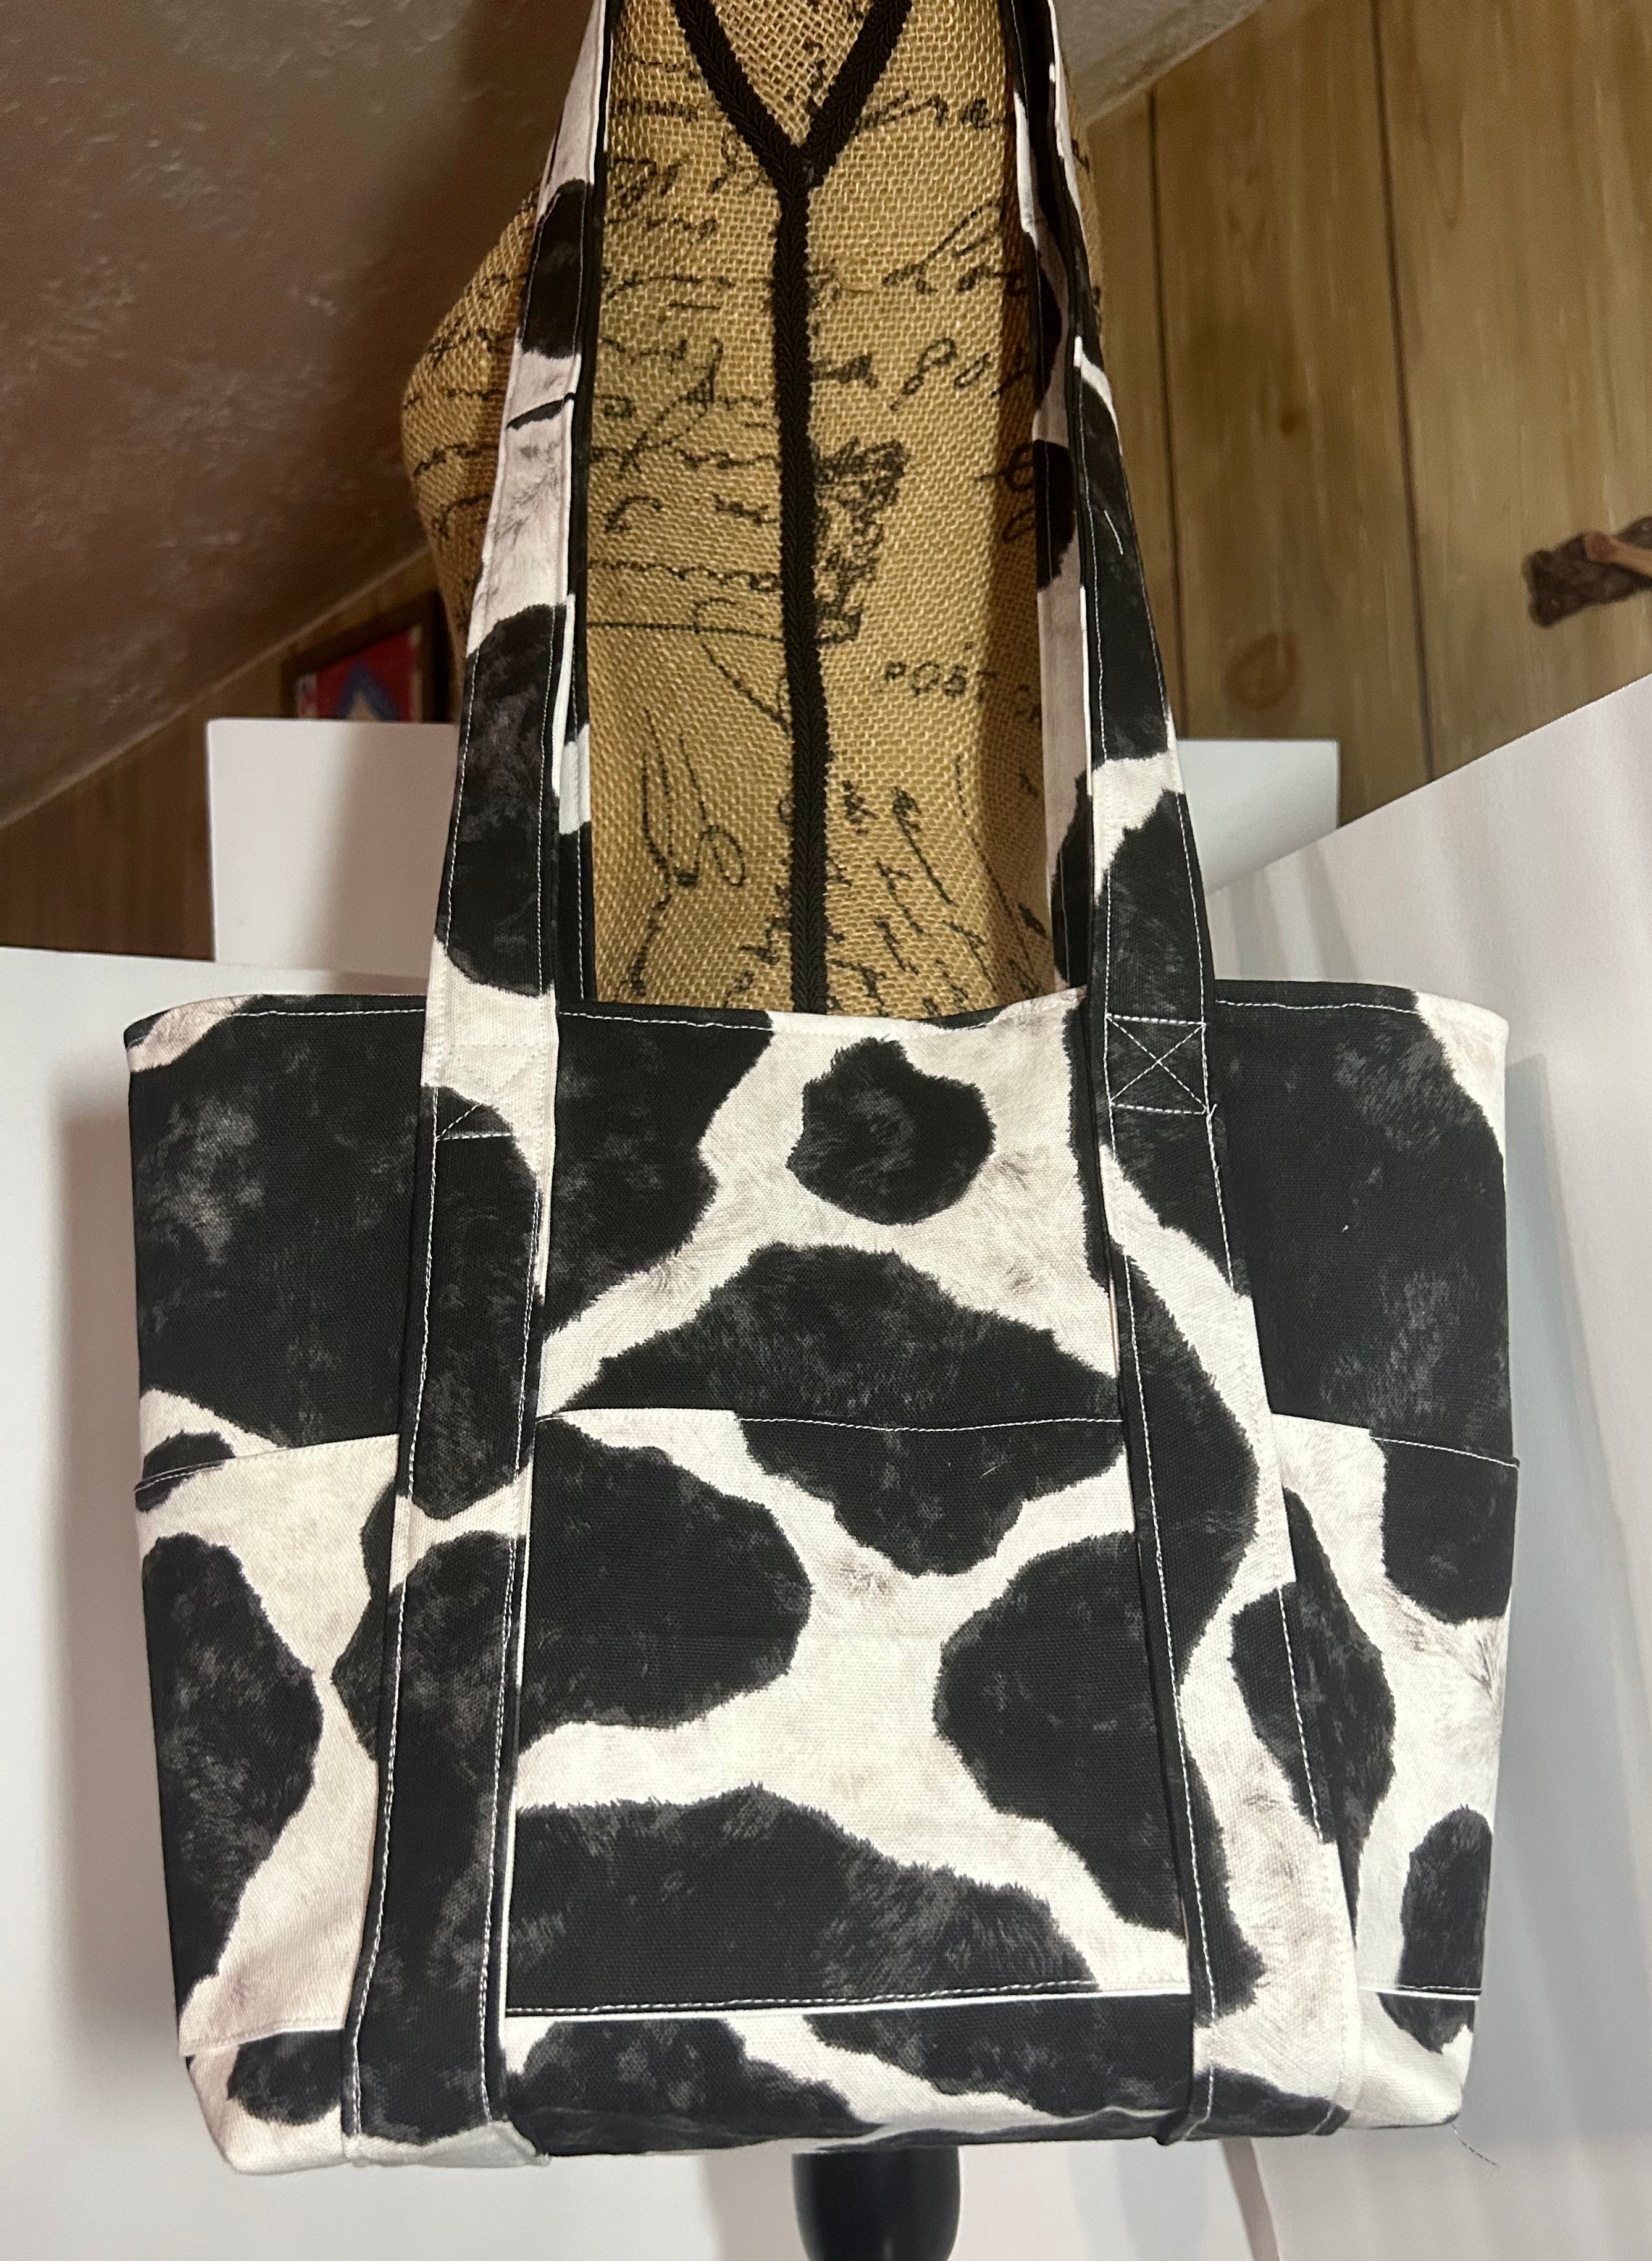 Explorer Tote Bag - Cow print- Carry all Tote bag with 14 pockets